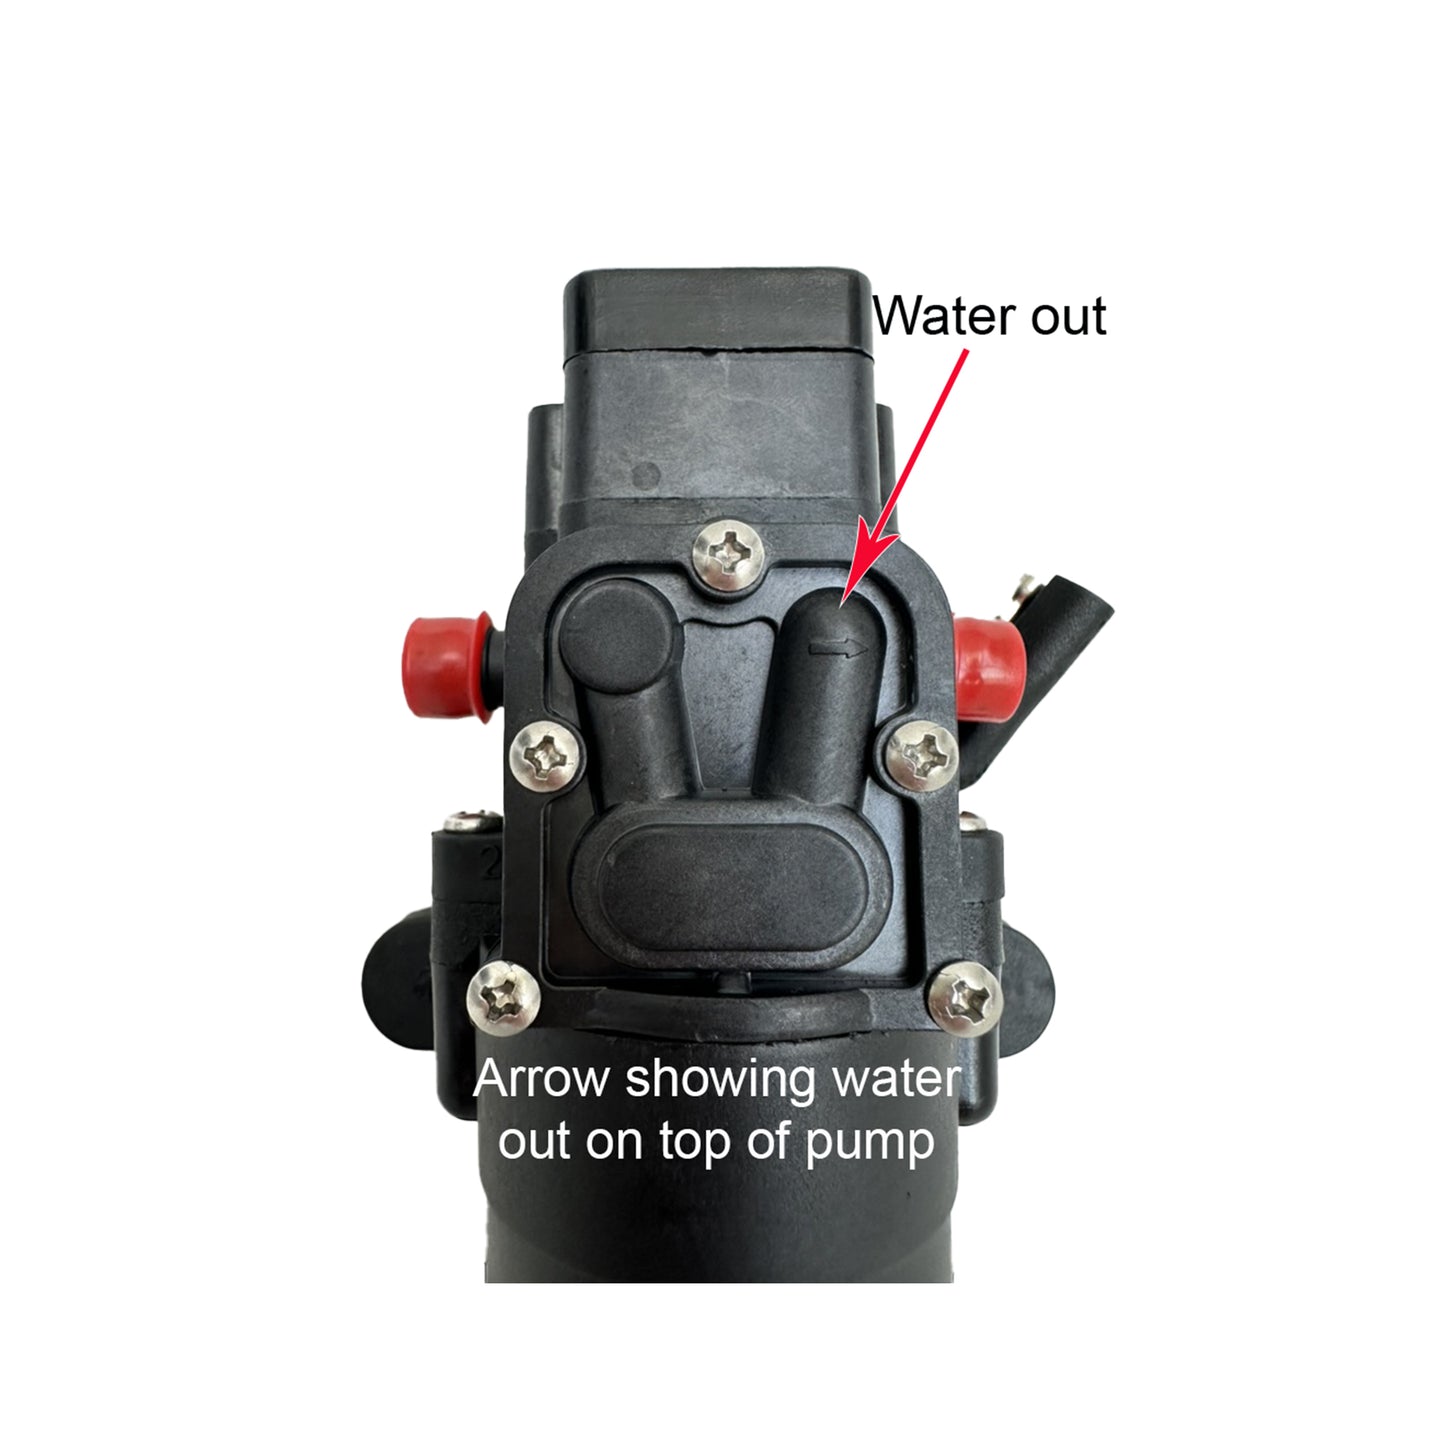 Accessories-4.3lpm-35psi-Water-Pressure-Pump-Country-Comfort-Water-Out-Top